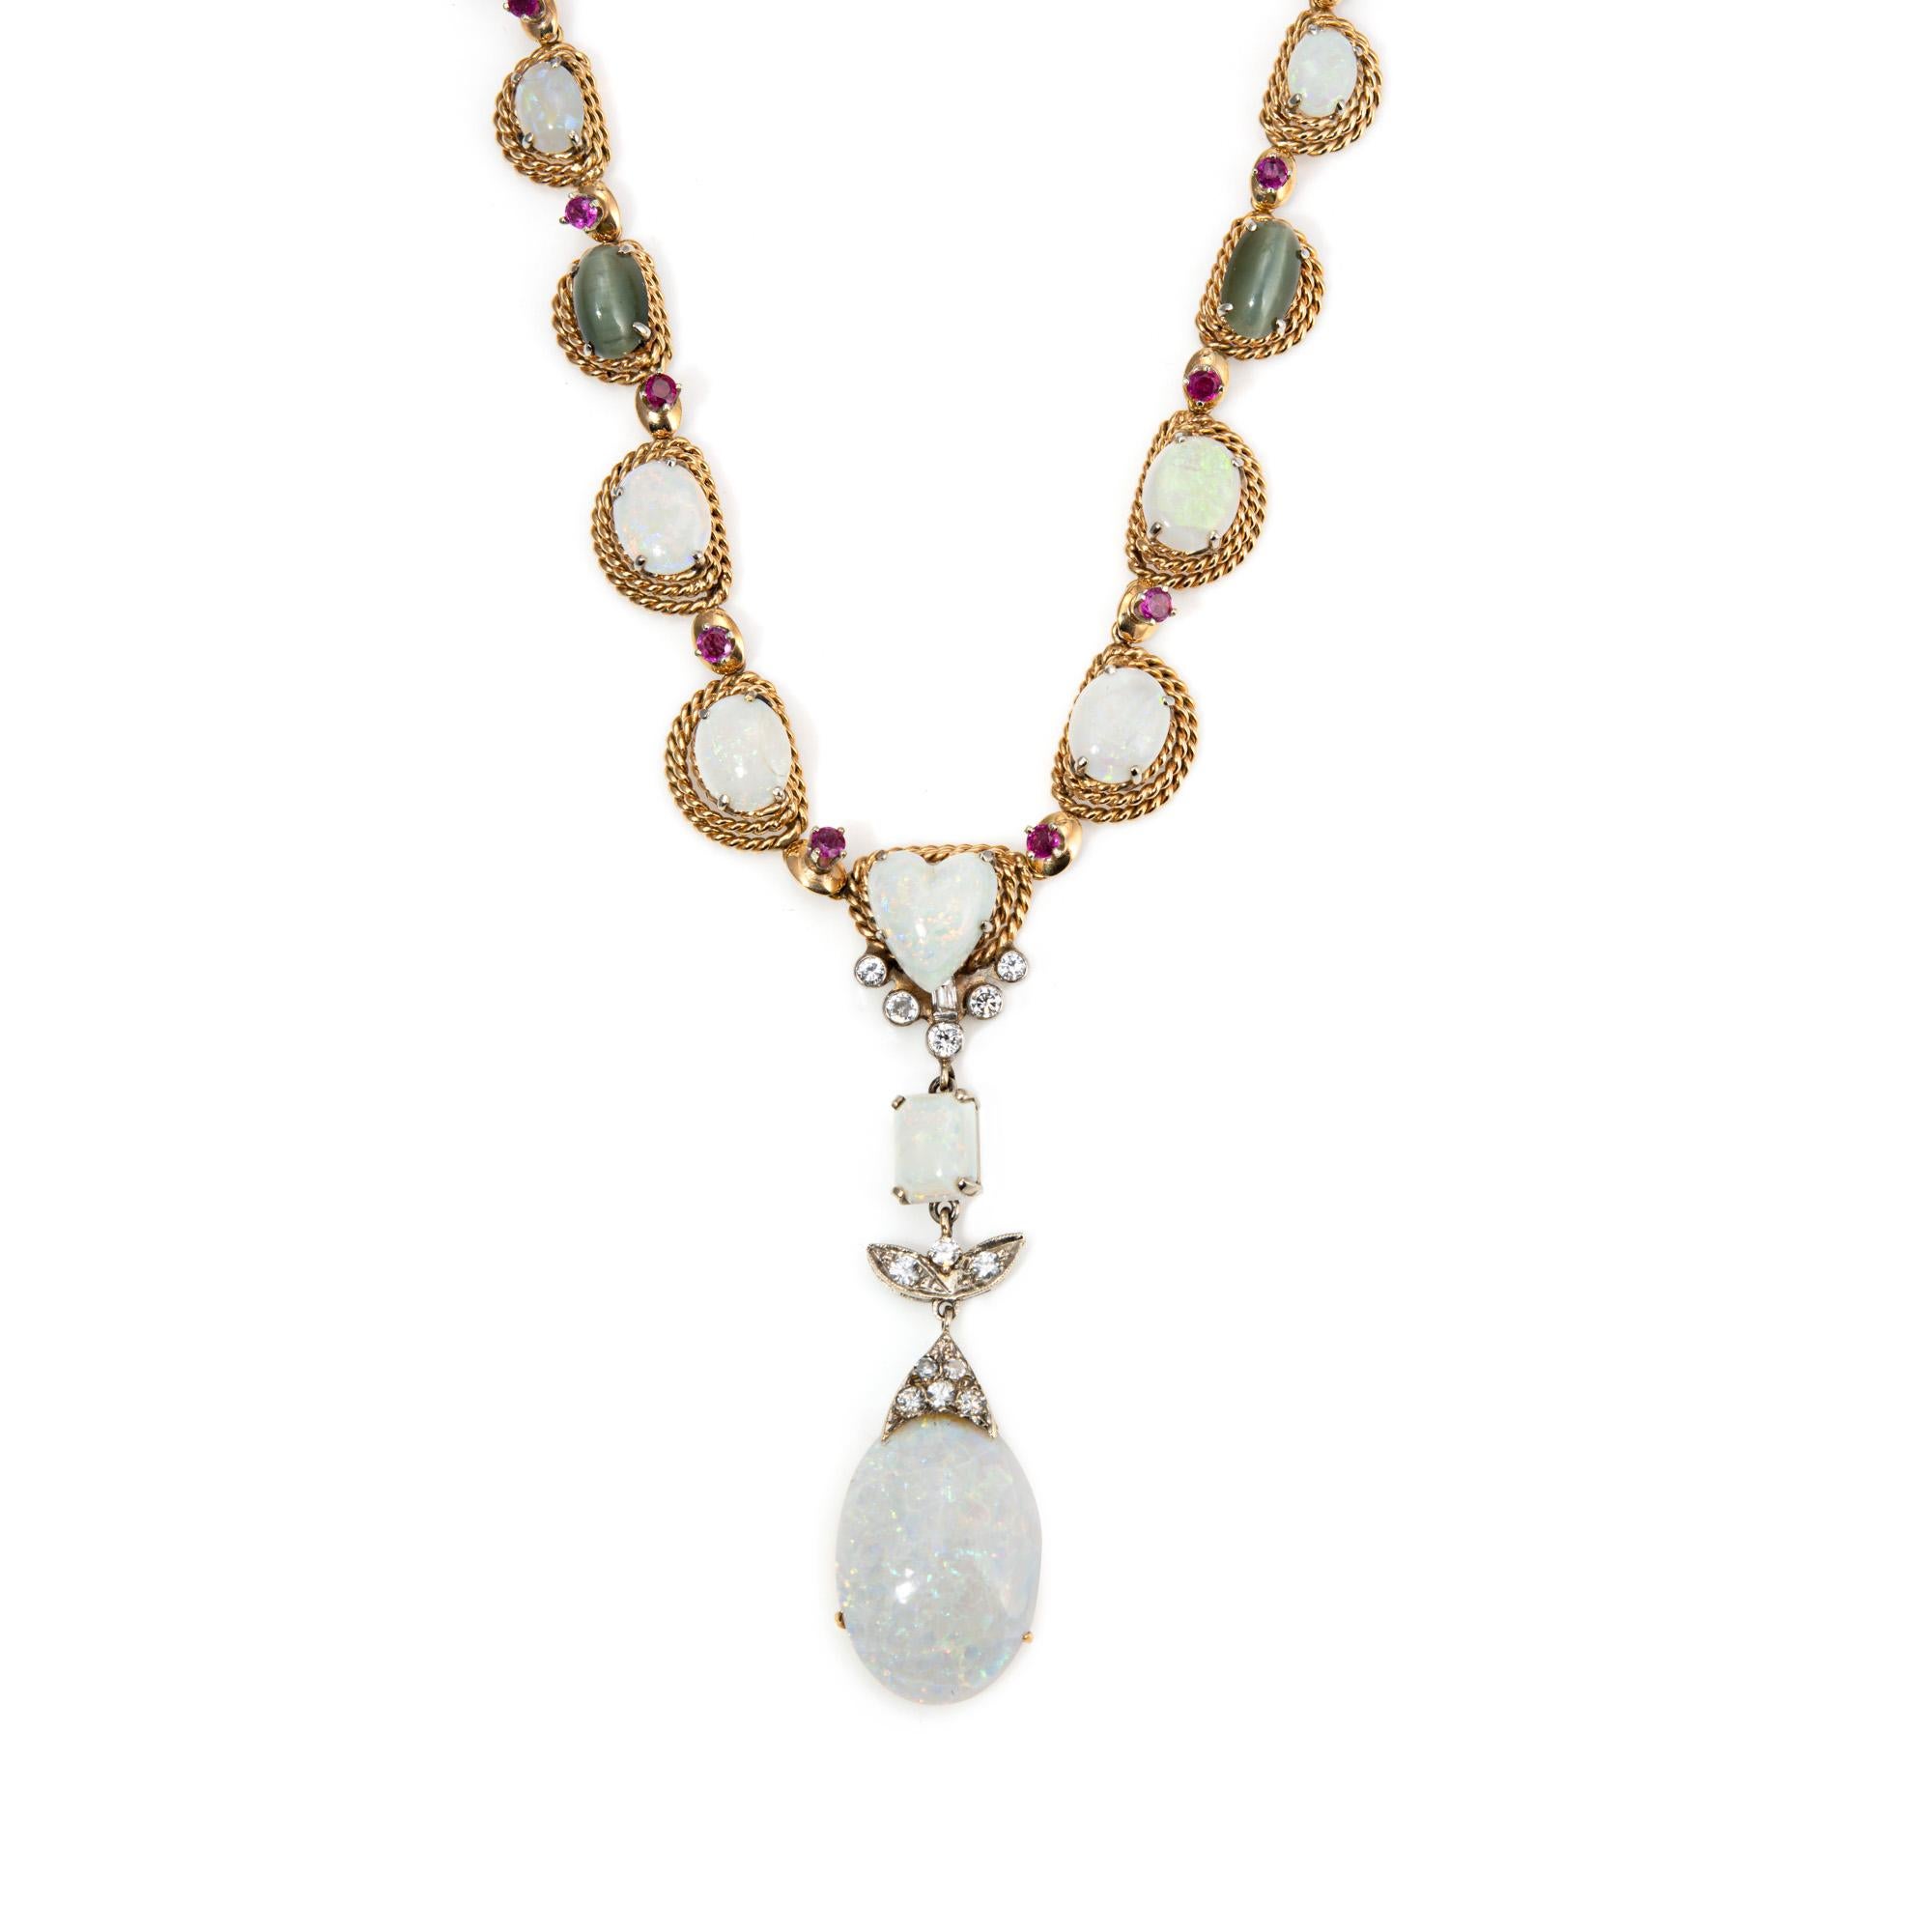 Stylish and finely detailed vintage gemstone drop necklace crafted in 14 karat yellow gold (circa 1960s). 

Opals, rubies, star sapphires and cat's eye is set into the necklace. The larger opal drop measures 23mm x 17mm. Diamonds total an estimated